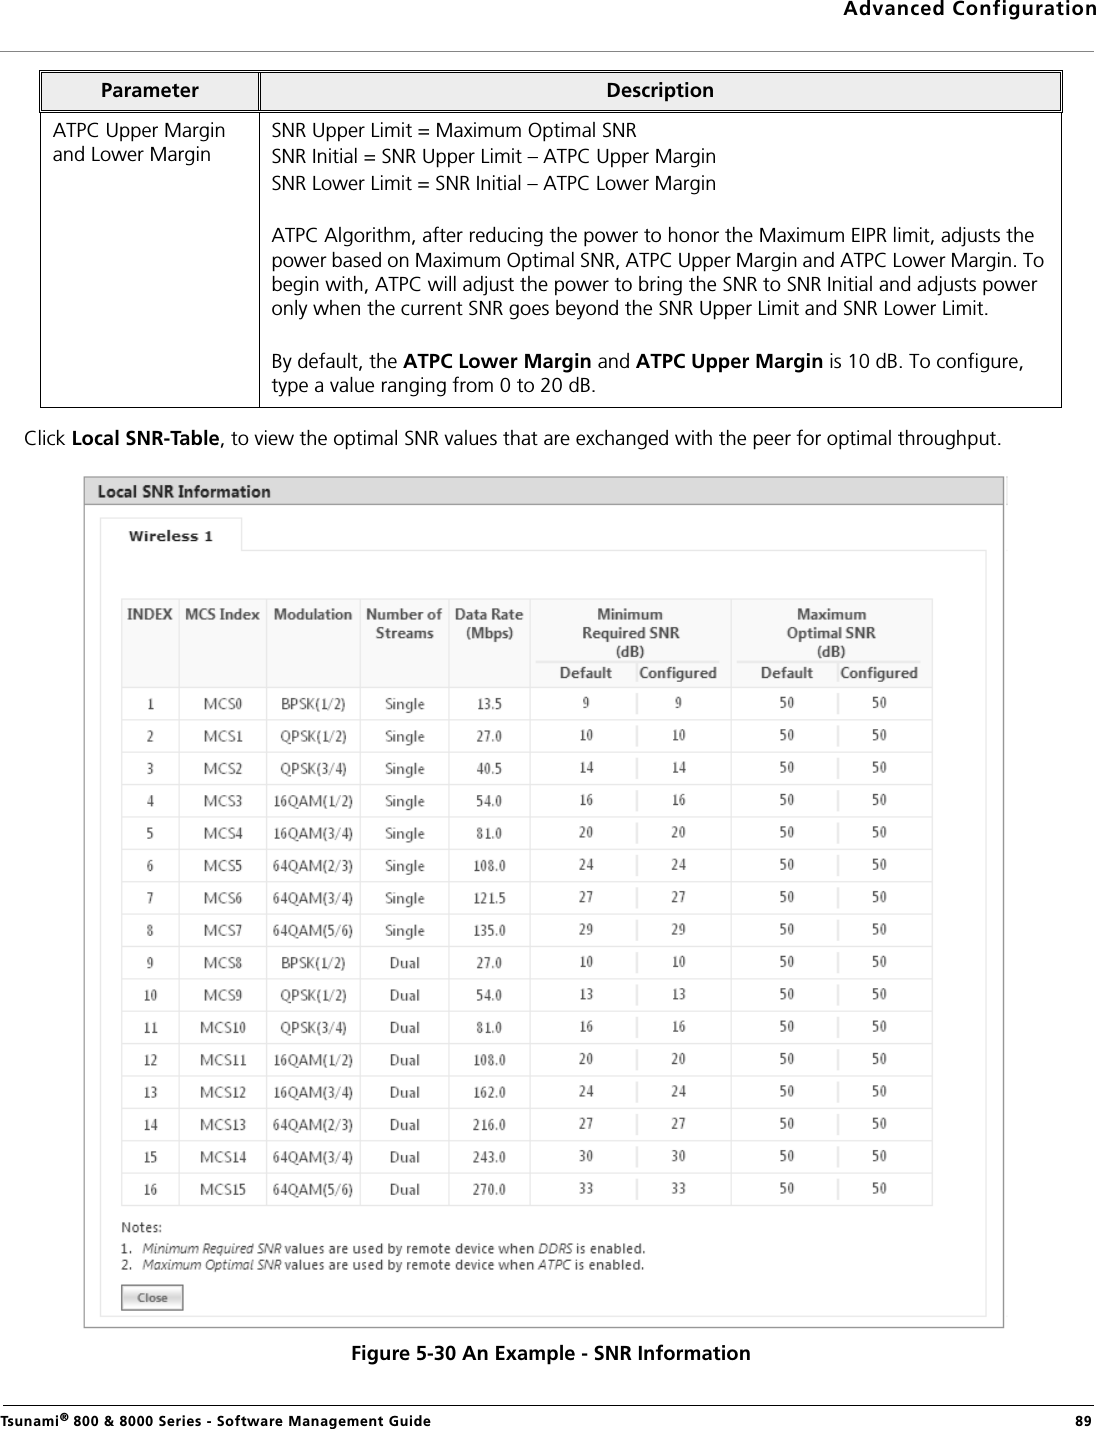 Advanced ConfigurationTsunami® 800 &amp; 8000 Series - Software Management Guide  89Click Local SNR-Table, to view the optimal SNR values that are exchanged with the peer for optimal throughput.Figure 5-30 An Example - SNR InformationATPC Upper Margin and Lower MarginSNR Upper Limit = Maximum Optimal SNRSNR Initial = SNR Upper Limit – ATPC Upper MarginSNR Lower Limit = SNR Initial – ATPC Lower MarginATPC Algorithm, after reducing the power to honor the Maximum EIPR limit, adjusts the power based on Maximum Optimal SNR, ATPC Upper Margin and ATPC Lower Margin. To begin with, ATPC will adjust the power to bring the SNR to SNR Initial and adjusts power only when the current SNR goes beyond the SNR Upper Limit and SNR Lower Limit.By default, the ATPC Lower Margin and ATPC Upper Margin is 10 dB. To configure, type a value ranging from 0 to 20 dB.Parameter Description